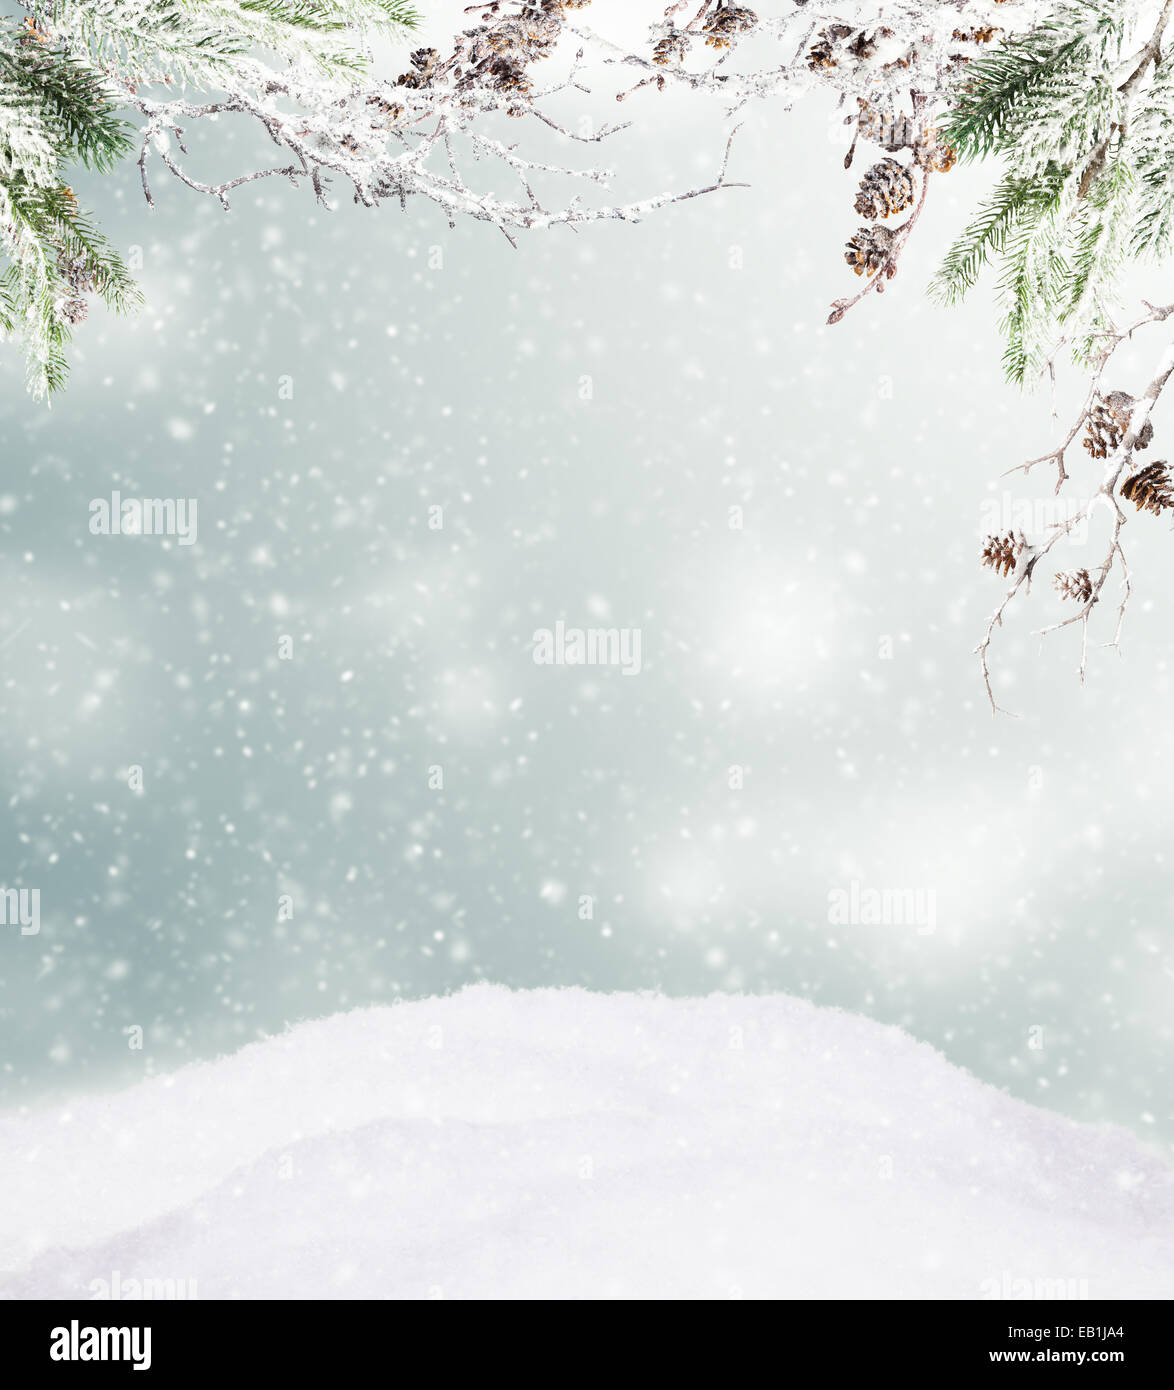 Snowy winter hill with spruce branches and free space for text Stock Photo